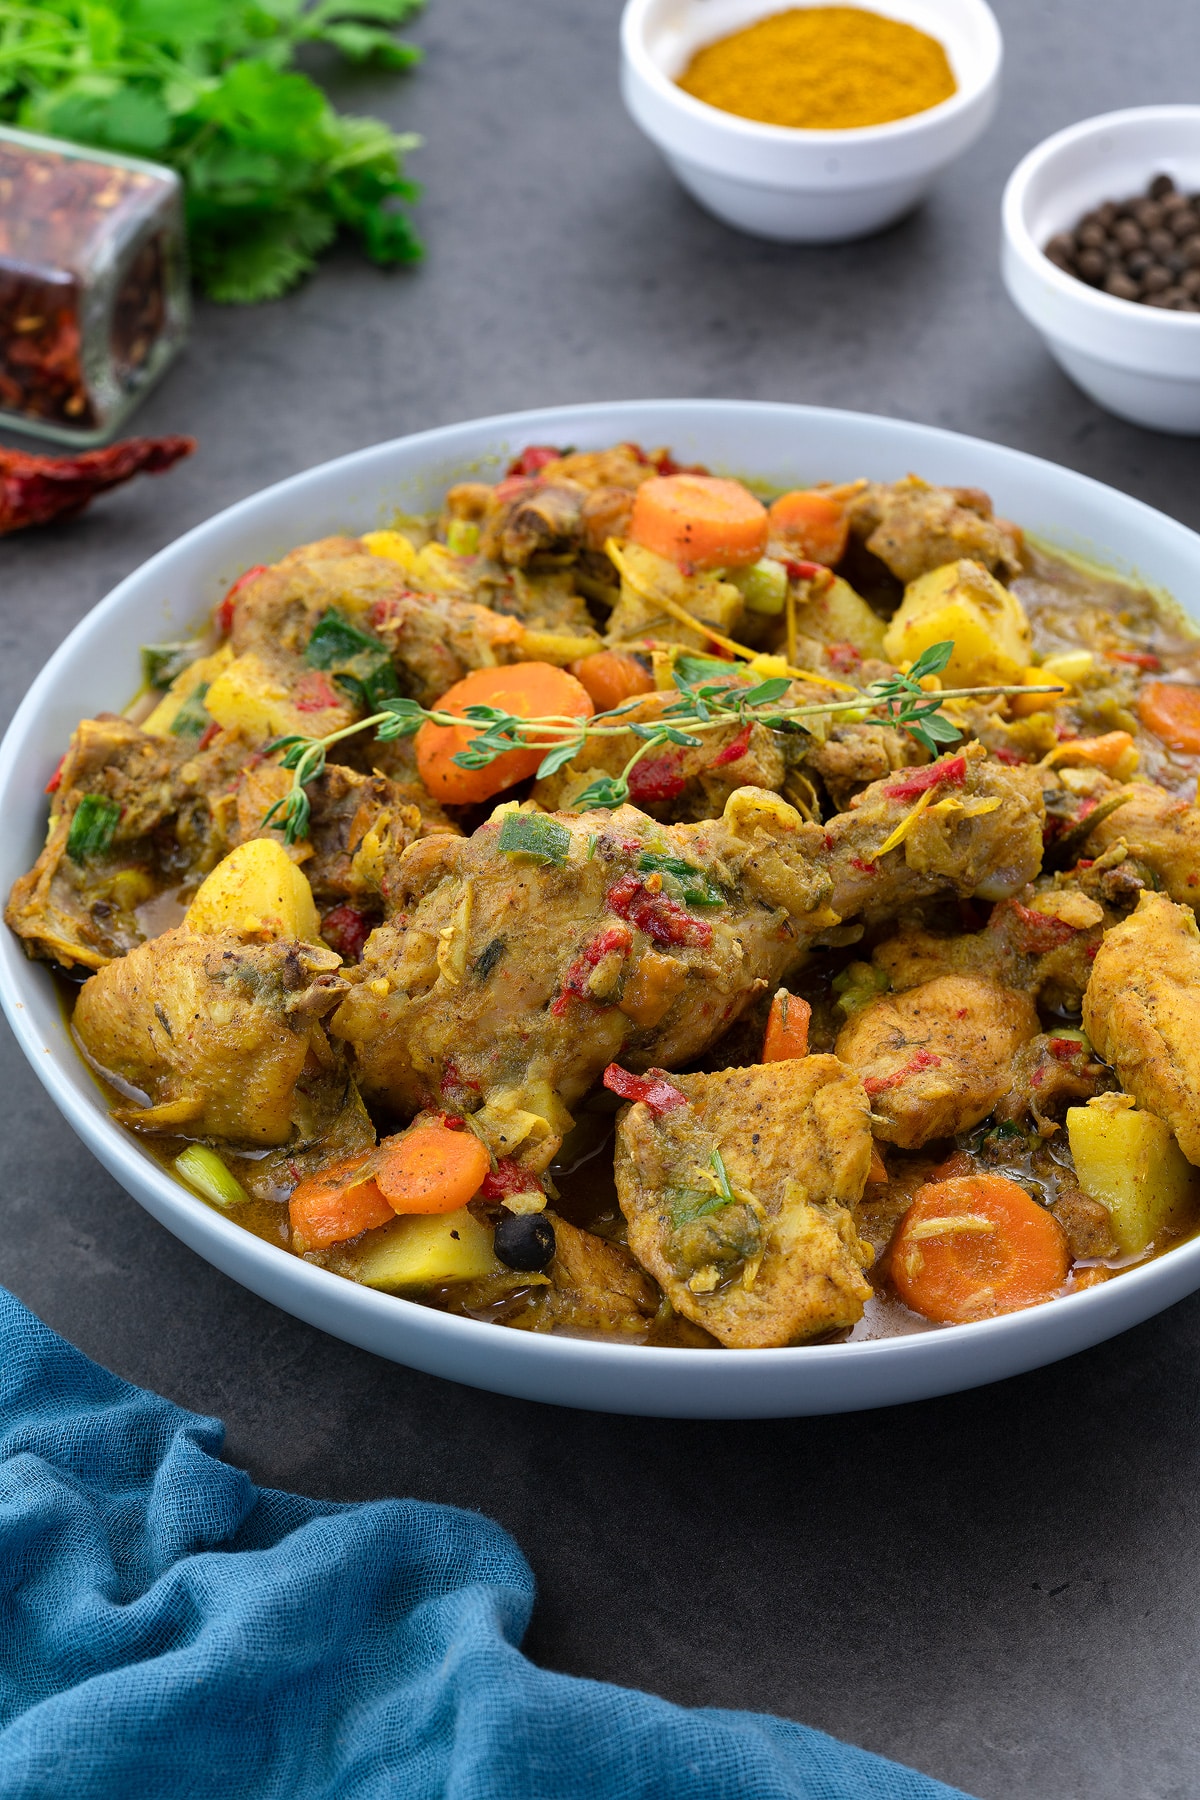 Jamaican curry chicken served in a white bowl on a grey table. Accompanied by cups of turmeric powder and allspice berries, as well as a small green and blue towel.